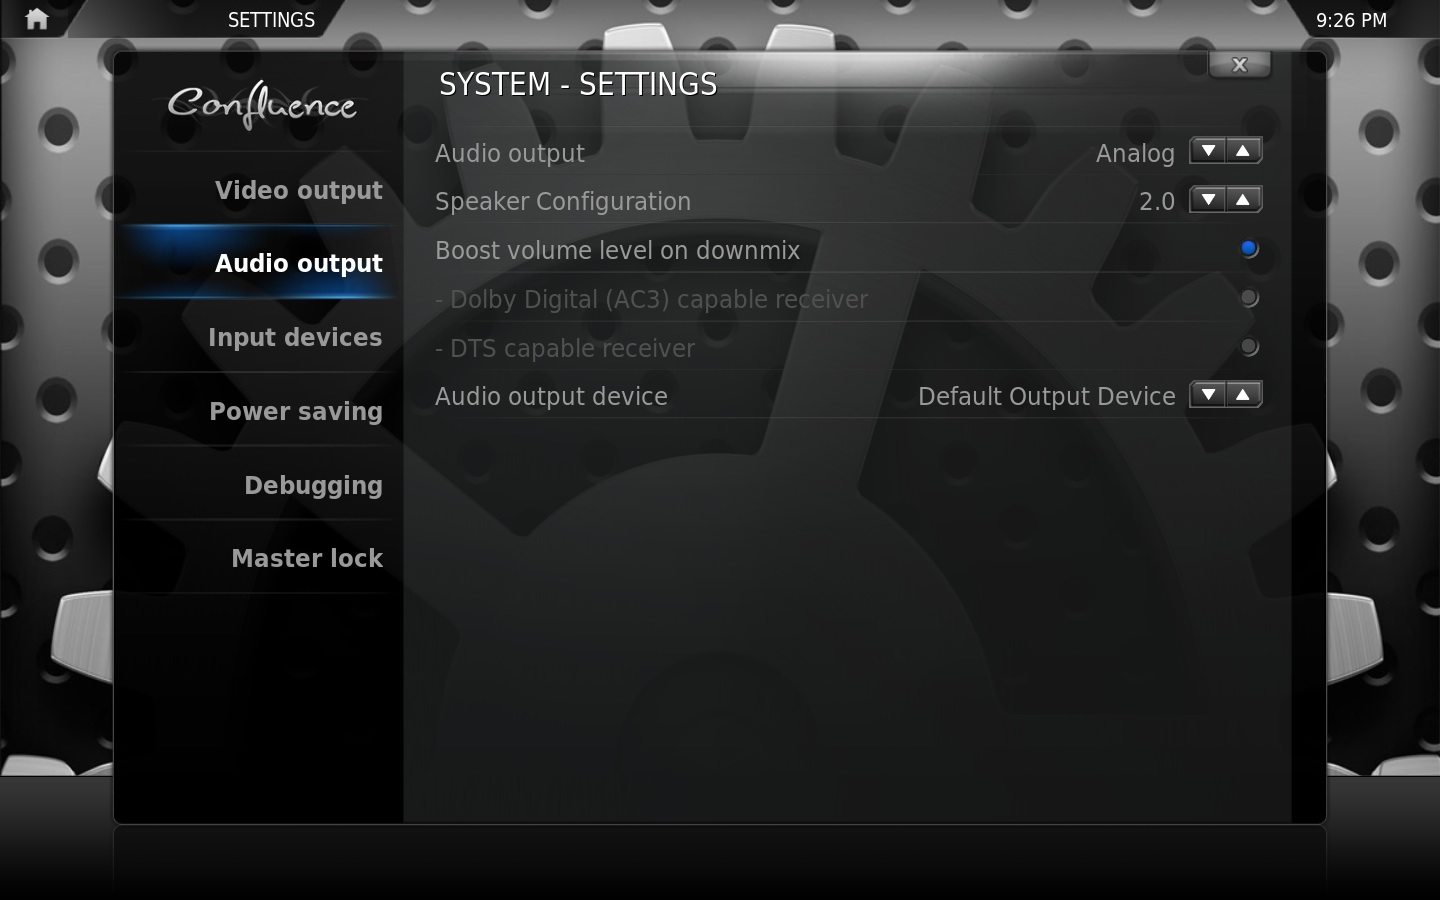 File:Settings.system.audio output.jpg